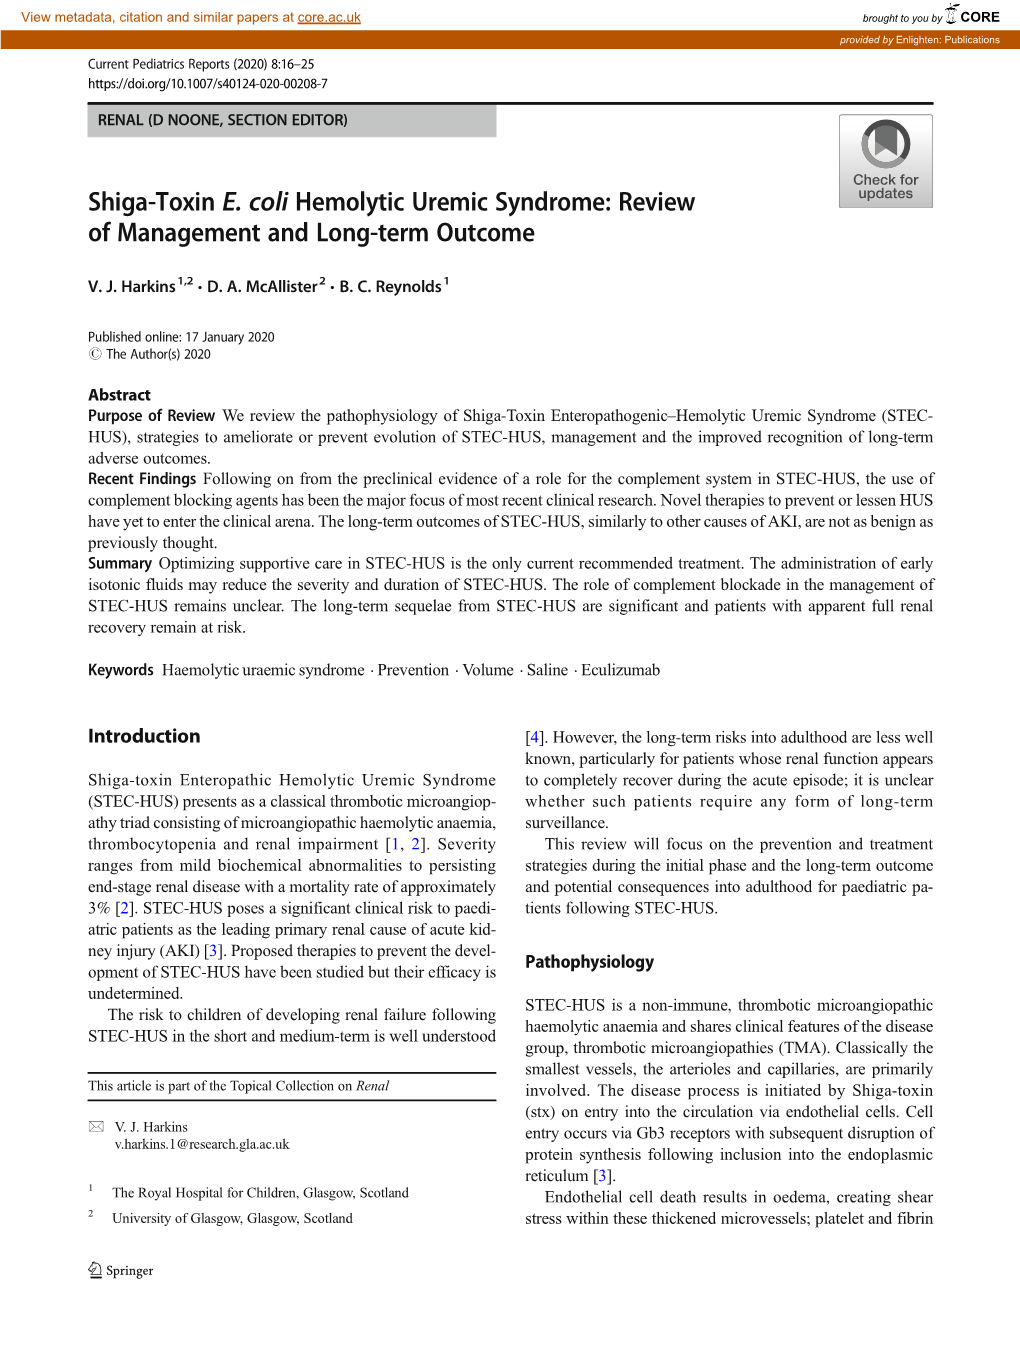 Shiga-Toxin E. Coli Hemolytic Uremic Syndrome: Review of Management and Long-Term Outcome